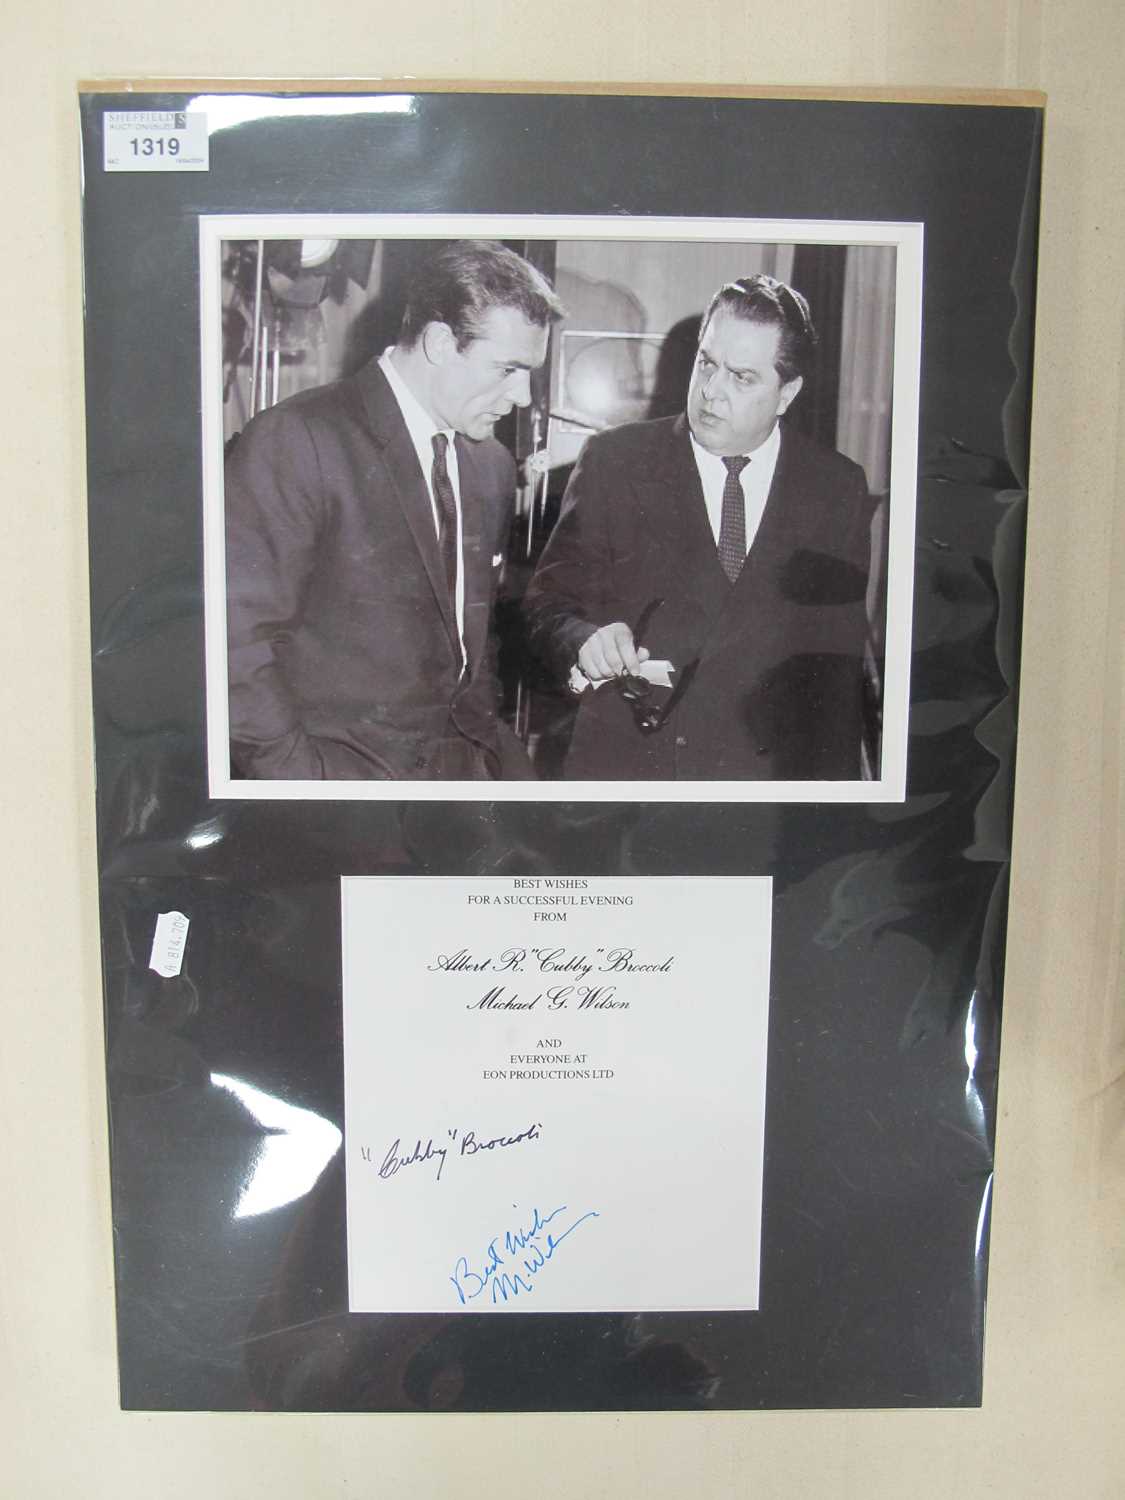 James Bond Producer Cubby Broccoli and Michael G. Wilson Autographs, pen signed (unverified) on